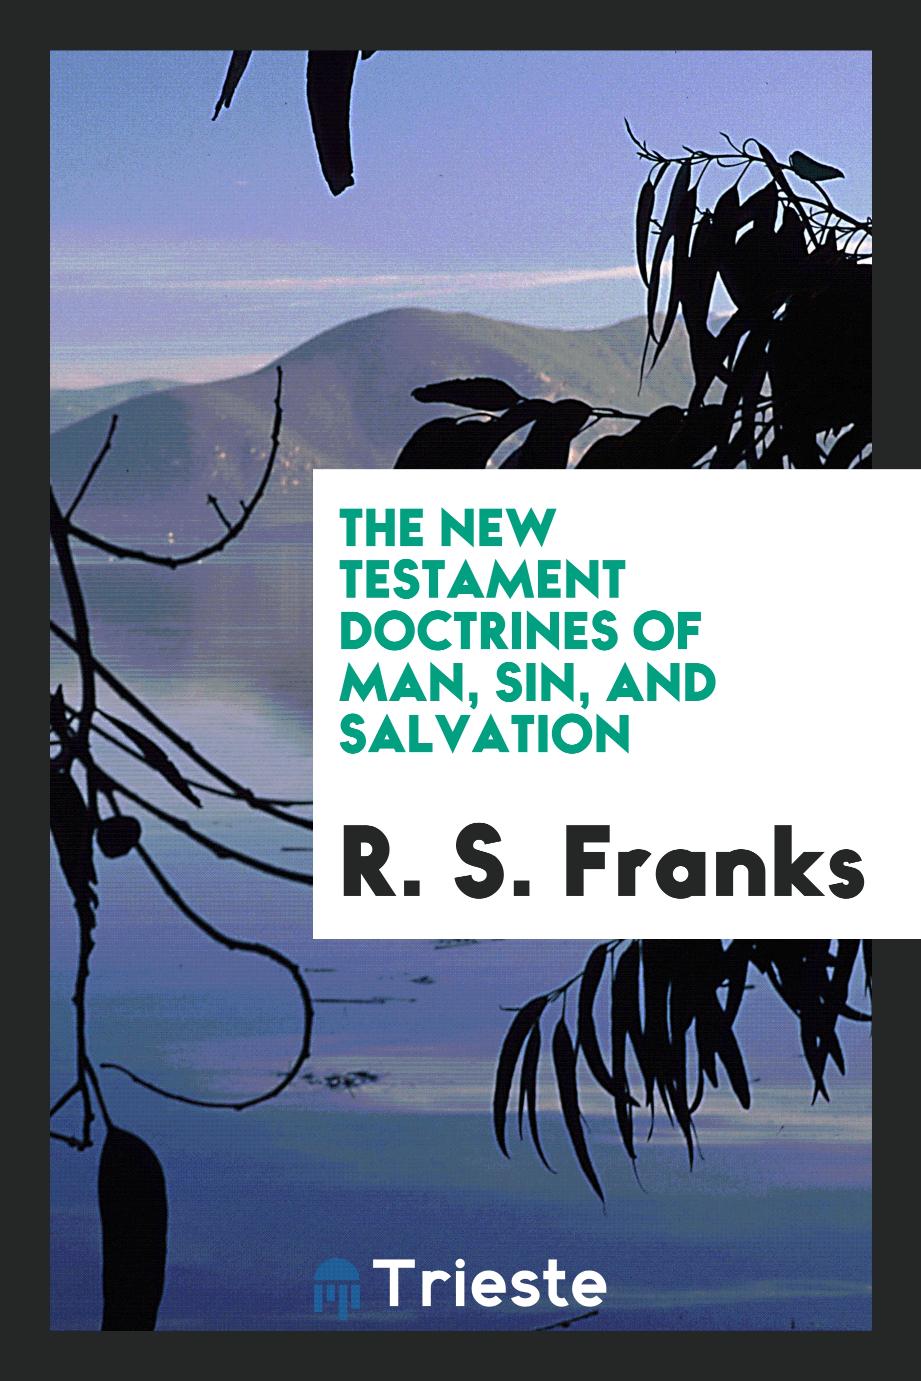 The New Testament doctrines of man, sin, and salvation